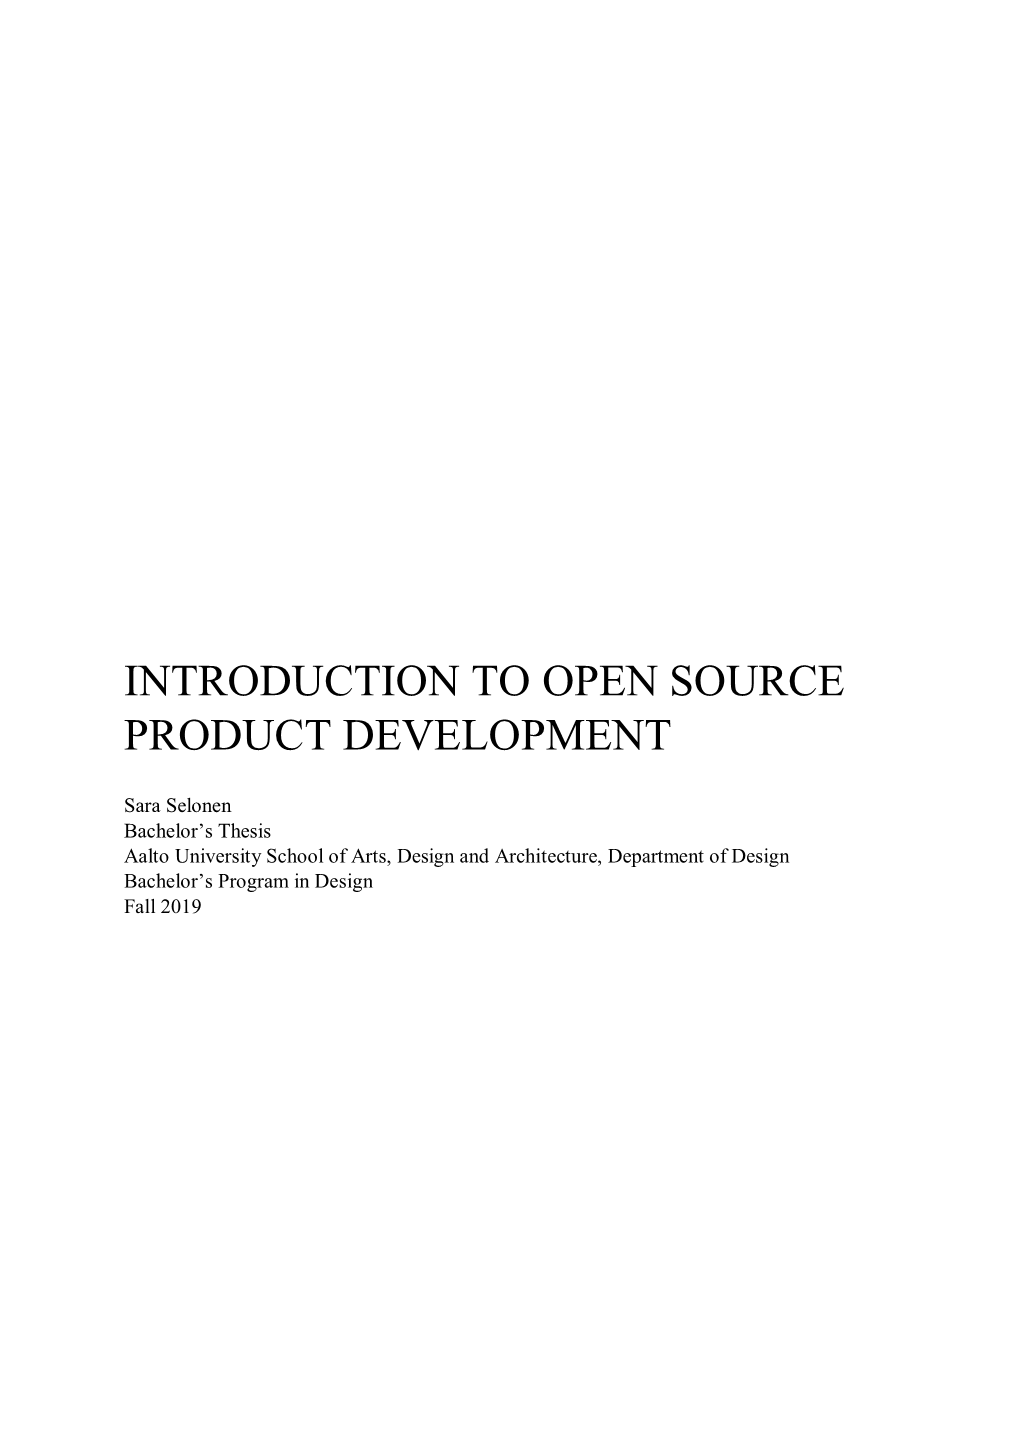 Introduction to Open Source Product Development